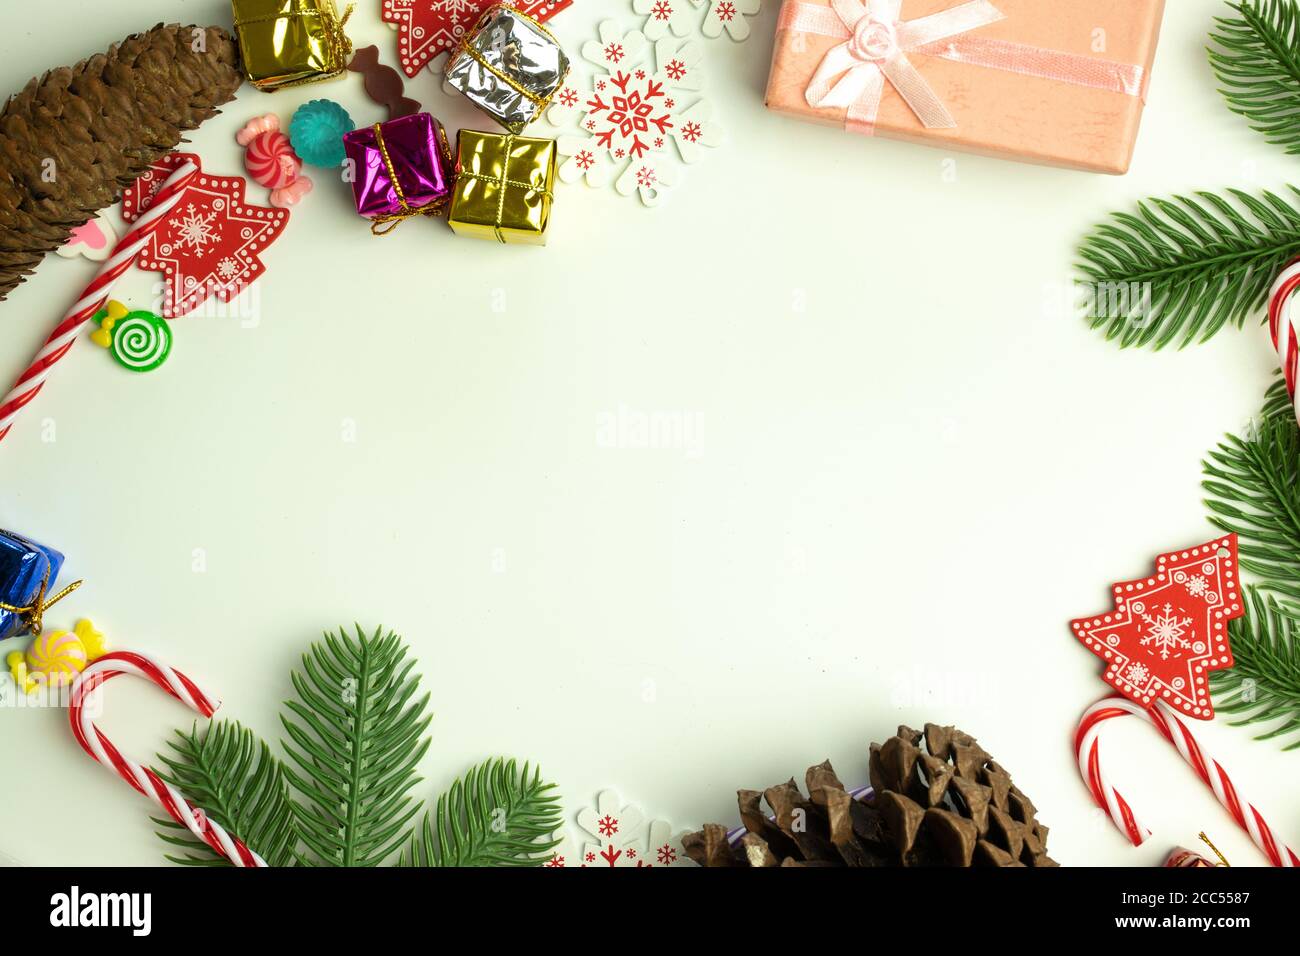 Christmas holidays style decoration flat lay with copy space Stock Photo